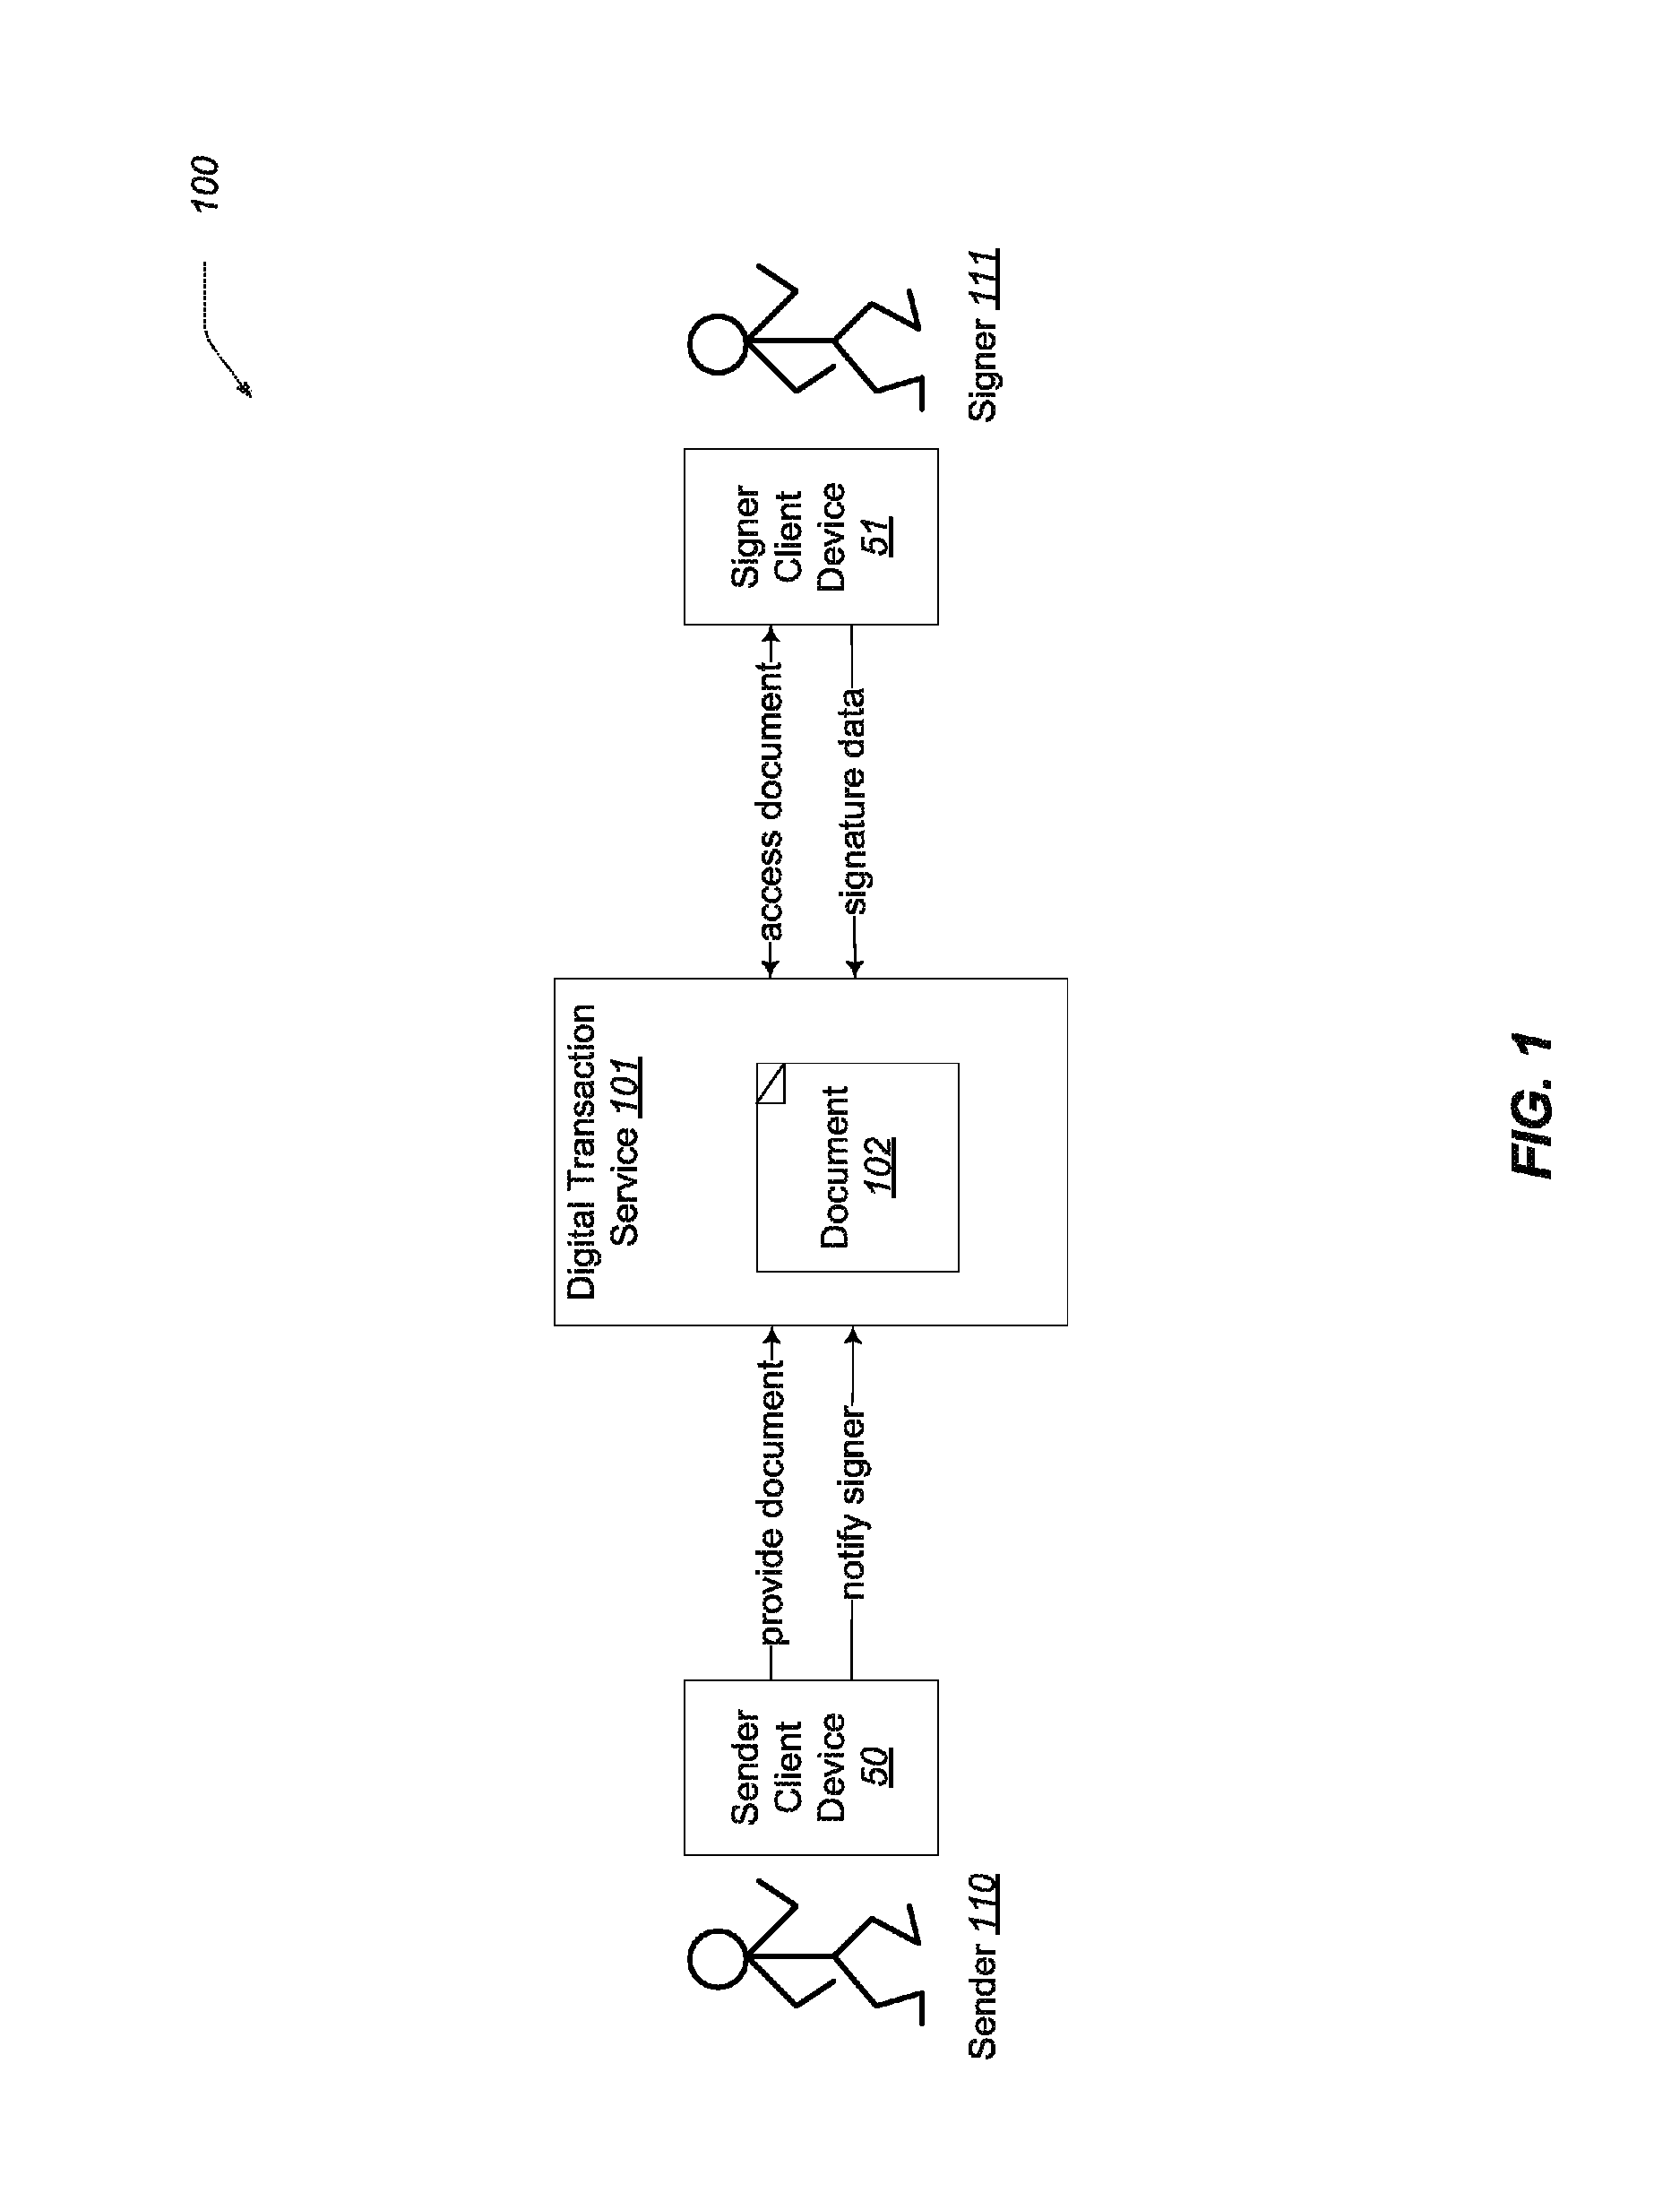 Systems and methods for employing document snapshots in transaction rooms for digital transactions